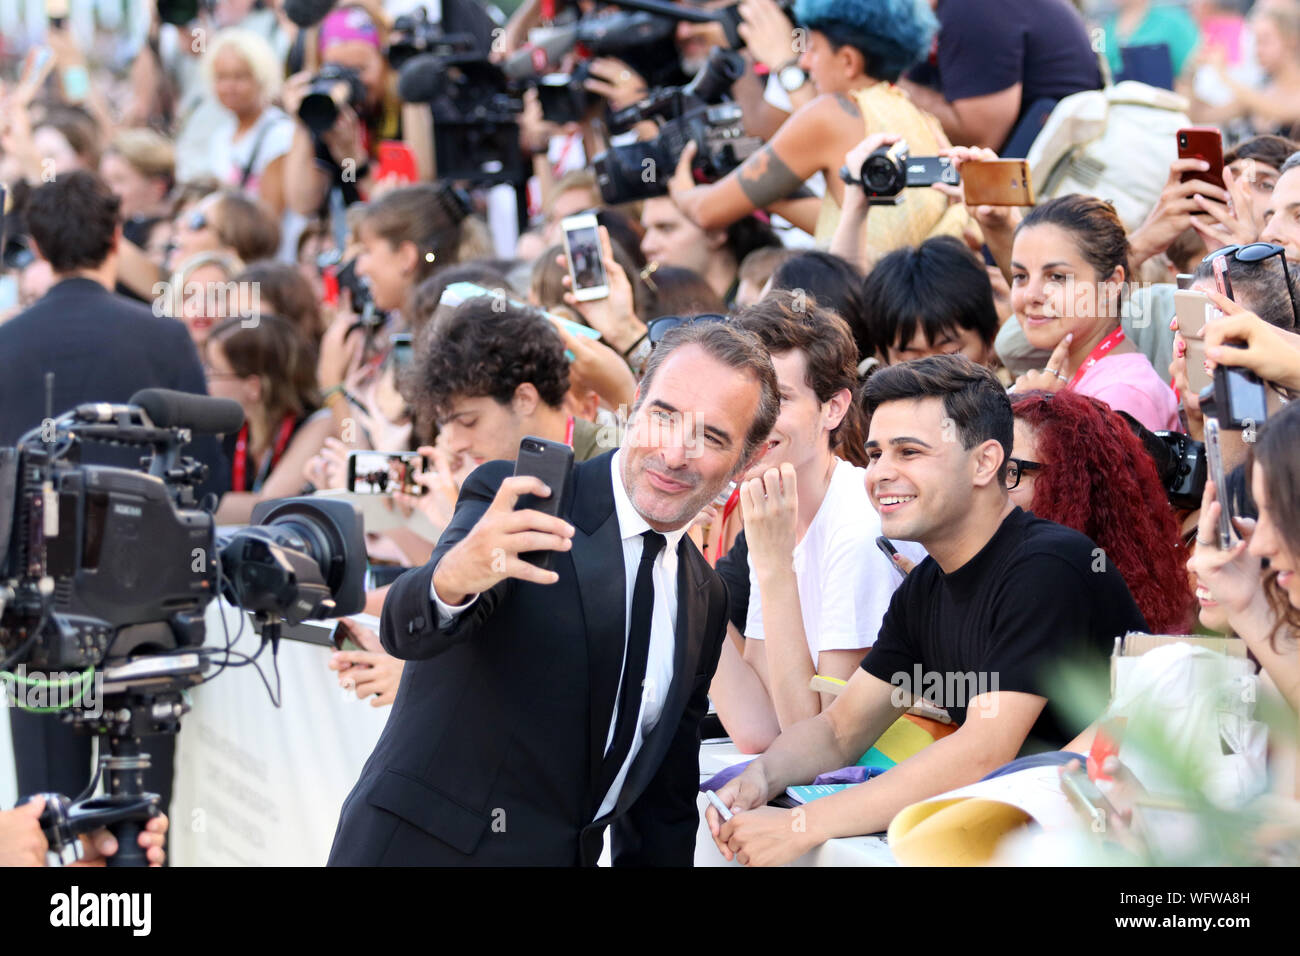 Italy, Lido di Venezia, August 30, 2019 : French actor Jean Dujardin walks the red carpet ahead of 'J'Accuse' (An Officer And A Spy) film by Roman Pol Stock Photo